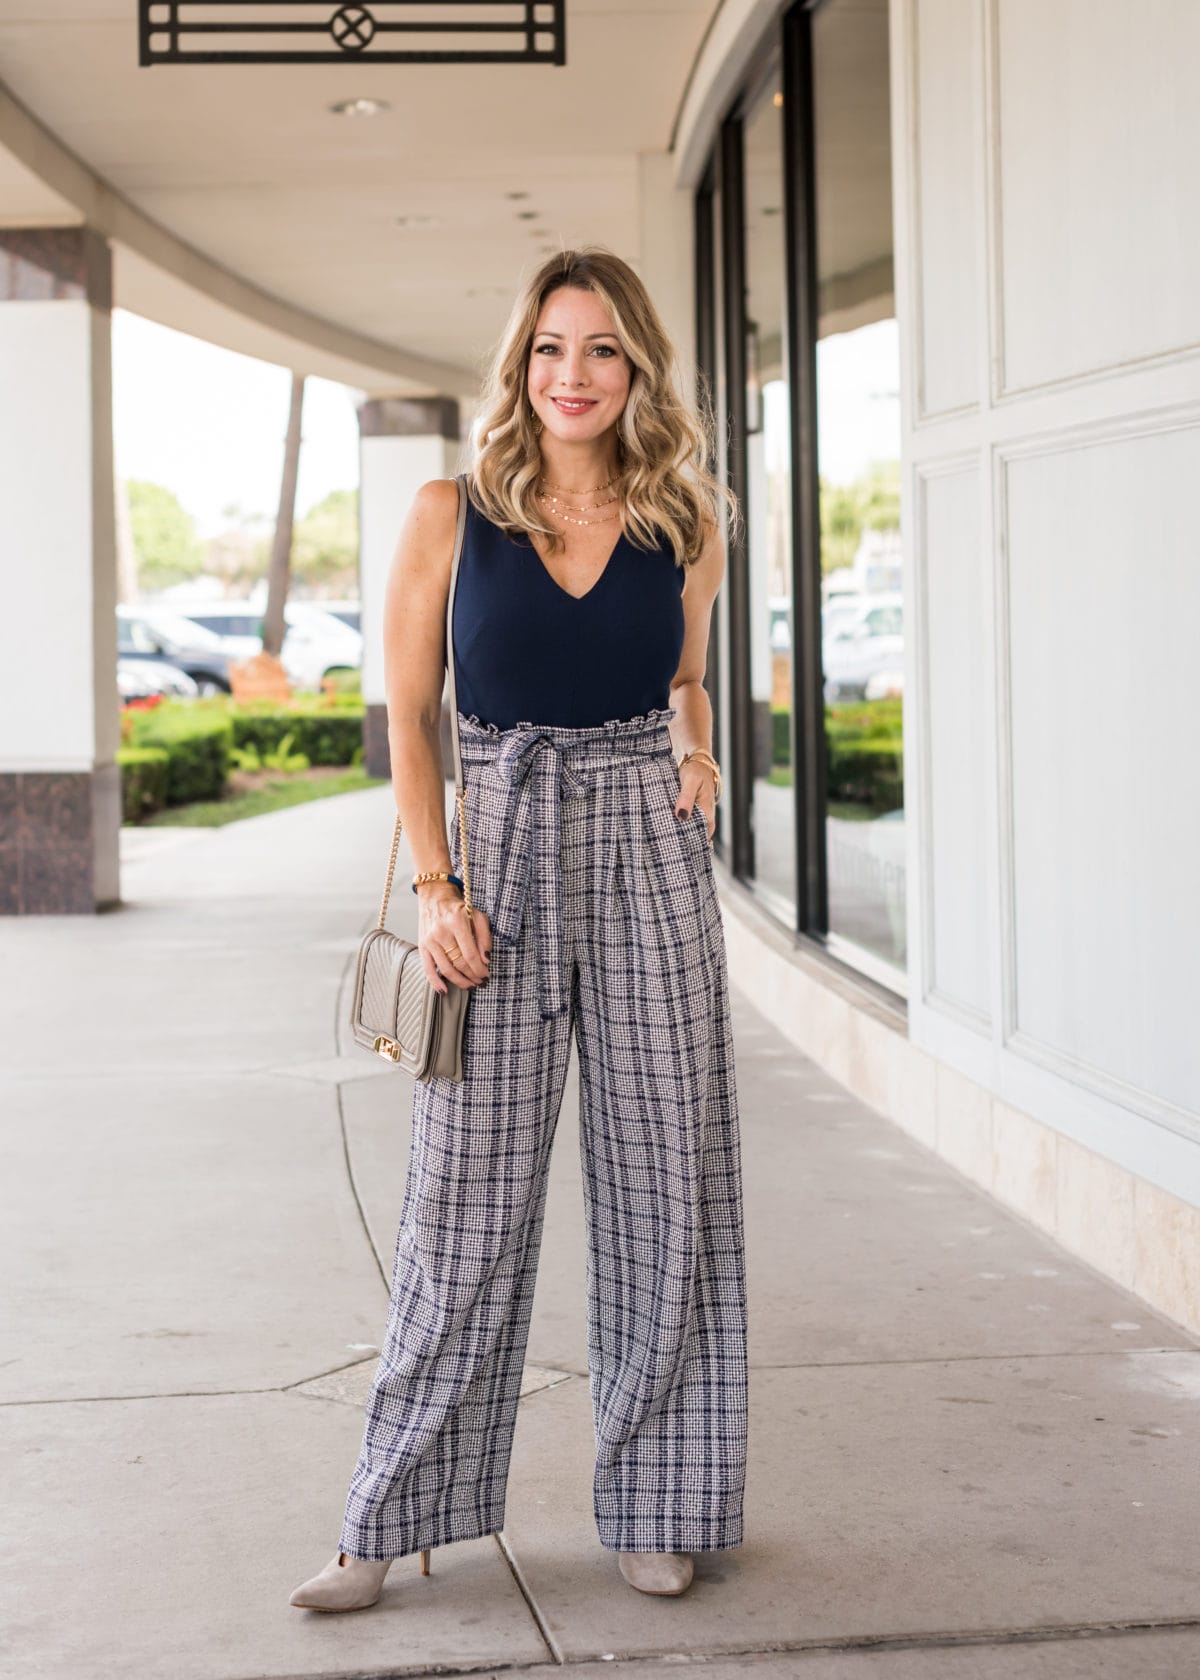 Dressy Jumpsuits To Wear From Summer To Fall – Honey We're Home